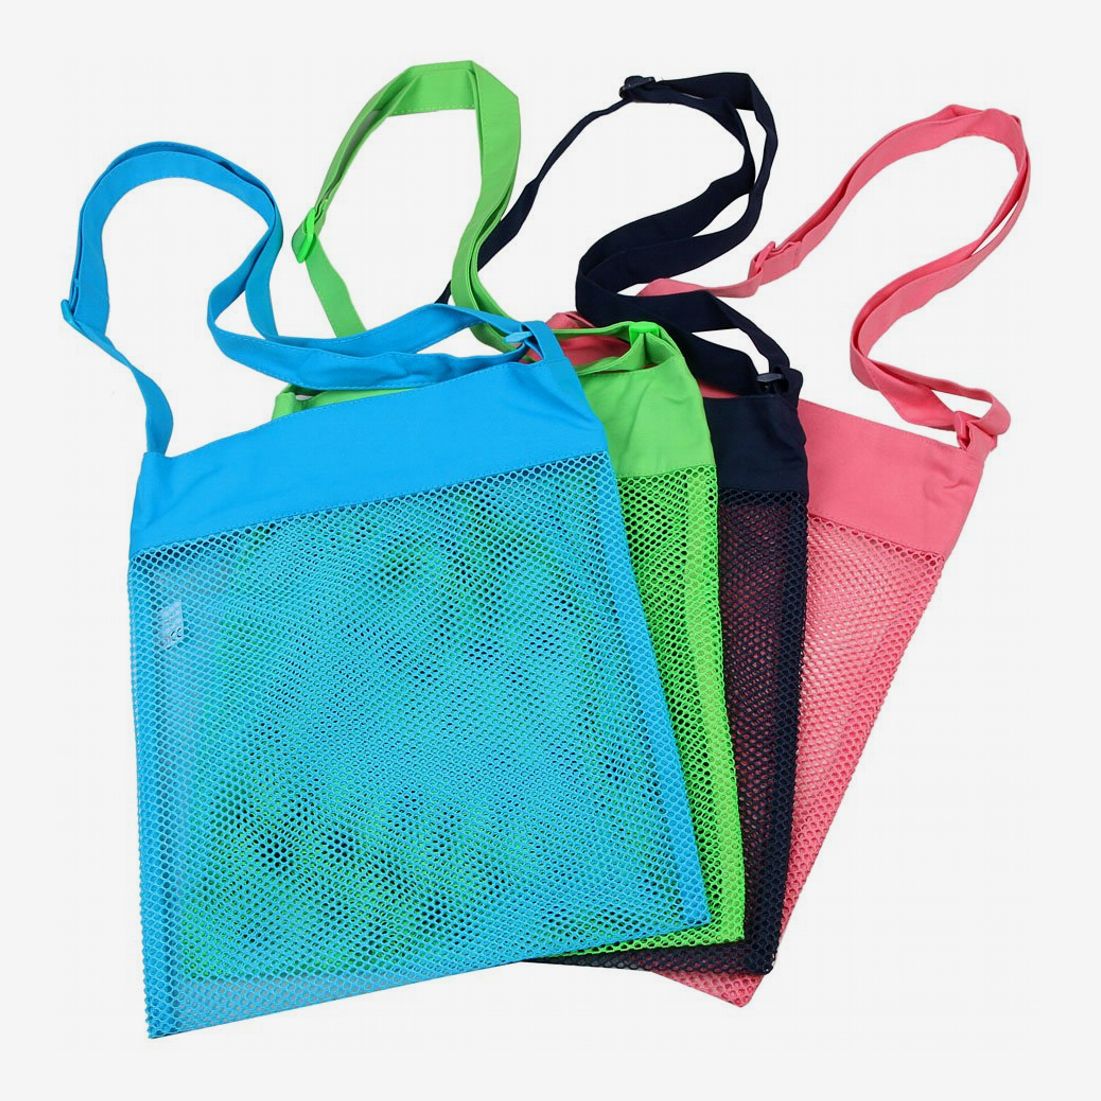 Details about   Strong String Large Mesh Tote Bag Beach Bag Travel Picnic Gym Clear Transparent 